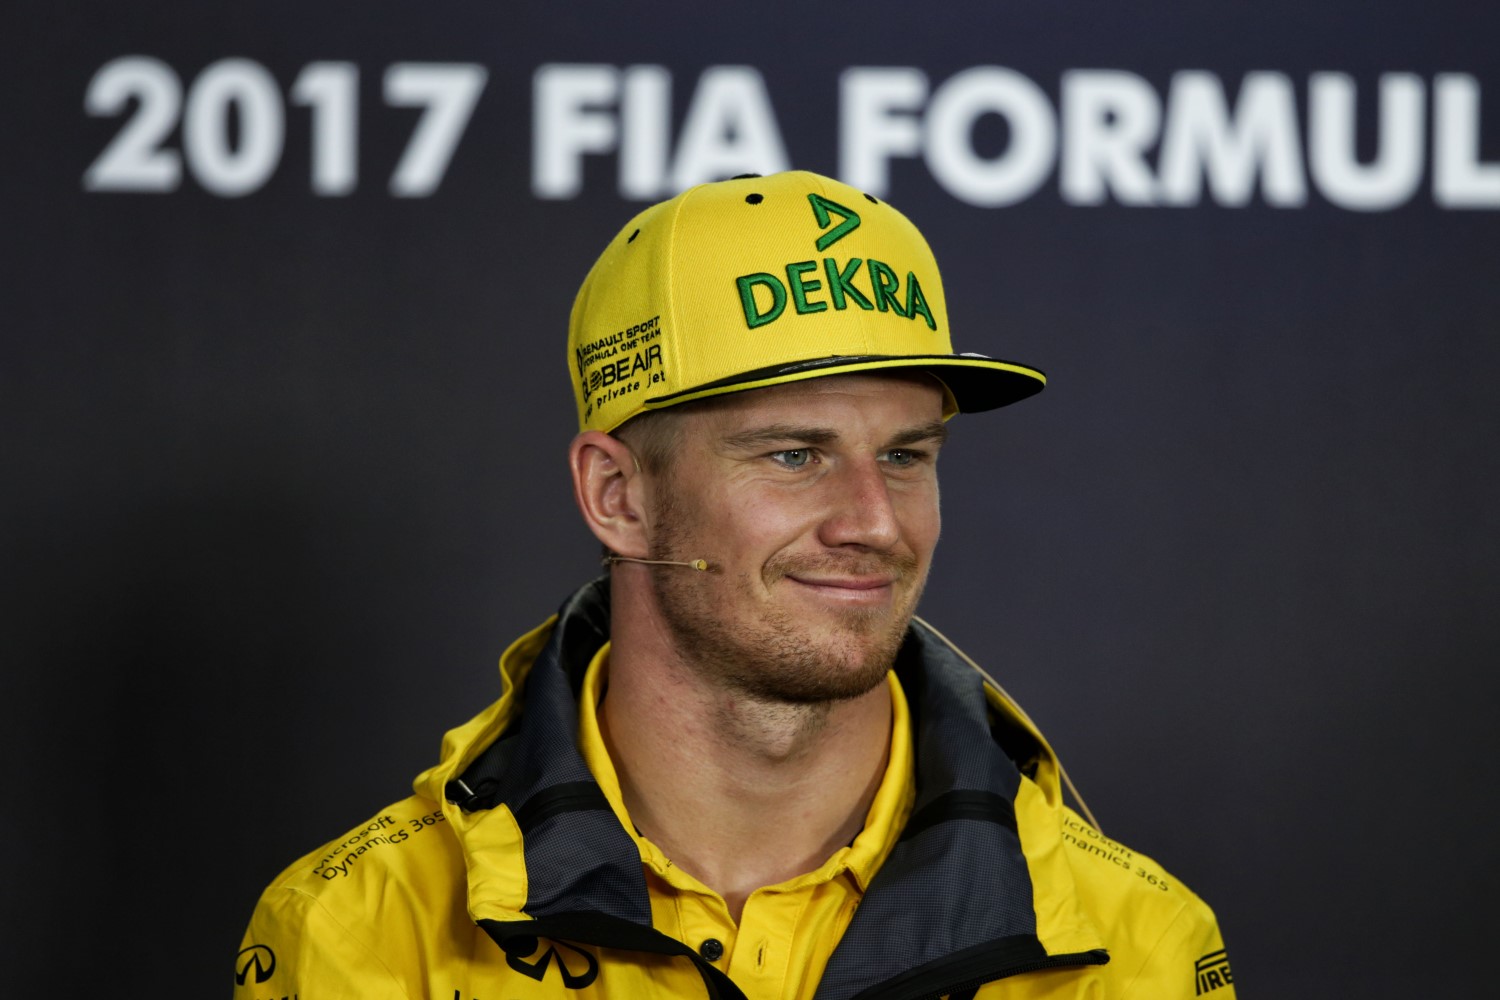 Hulkenberg to take 2 grid penalty for early gearbox change